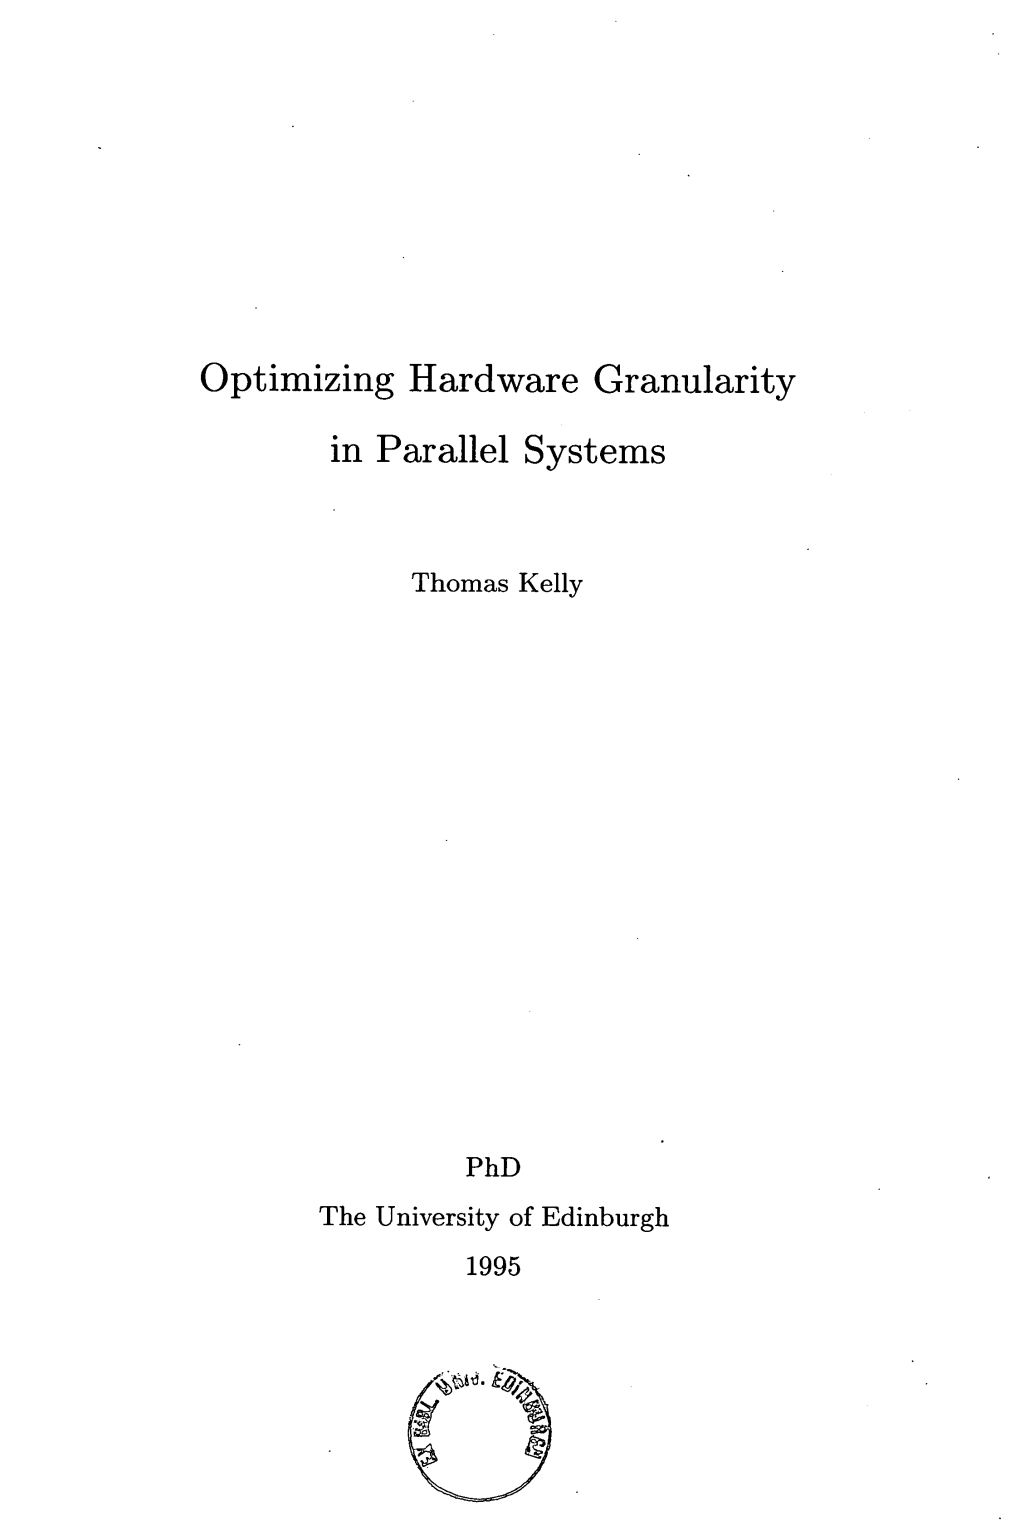 Optimizing Hardware Granularity in Parallel Systems